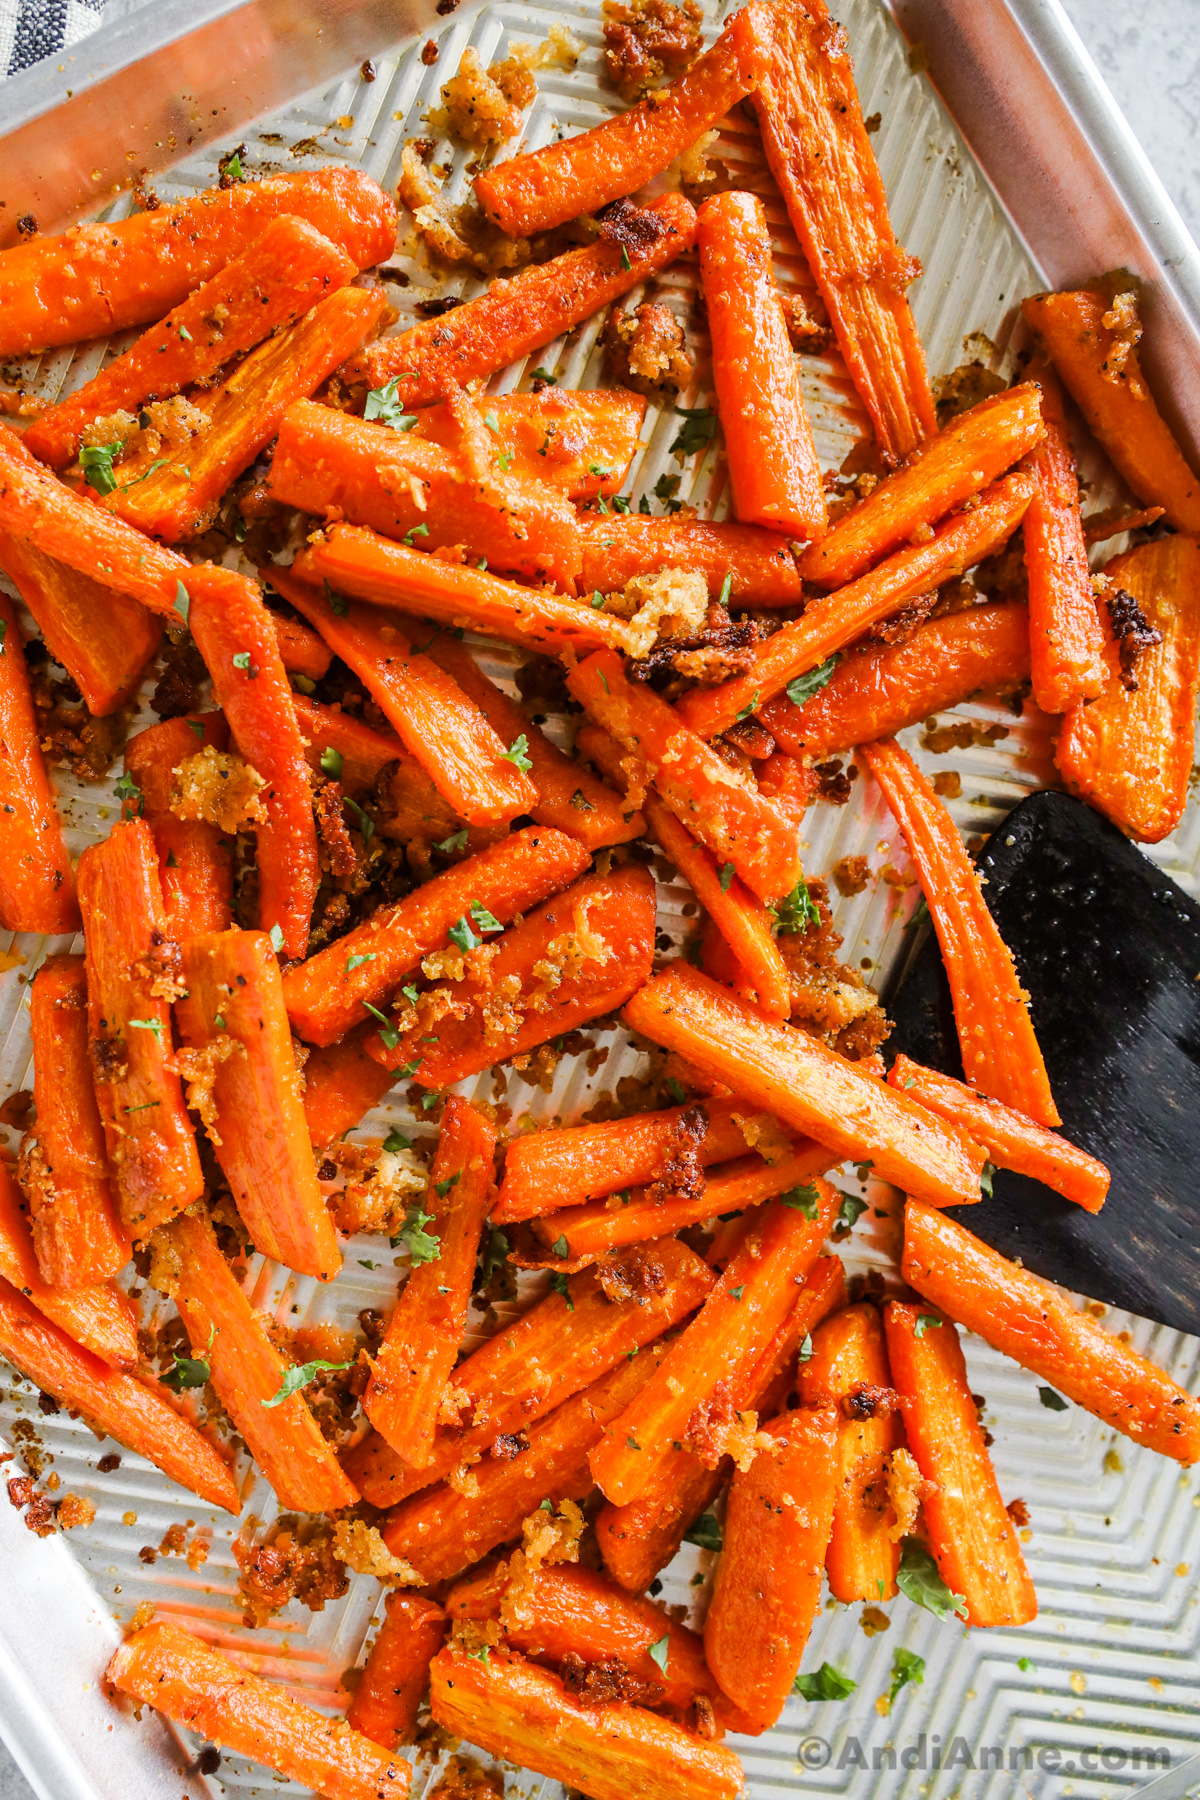 baked carrots with bread crumbs and chopped parsley on a baking sheet with a wood spatula.